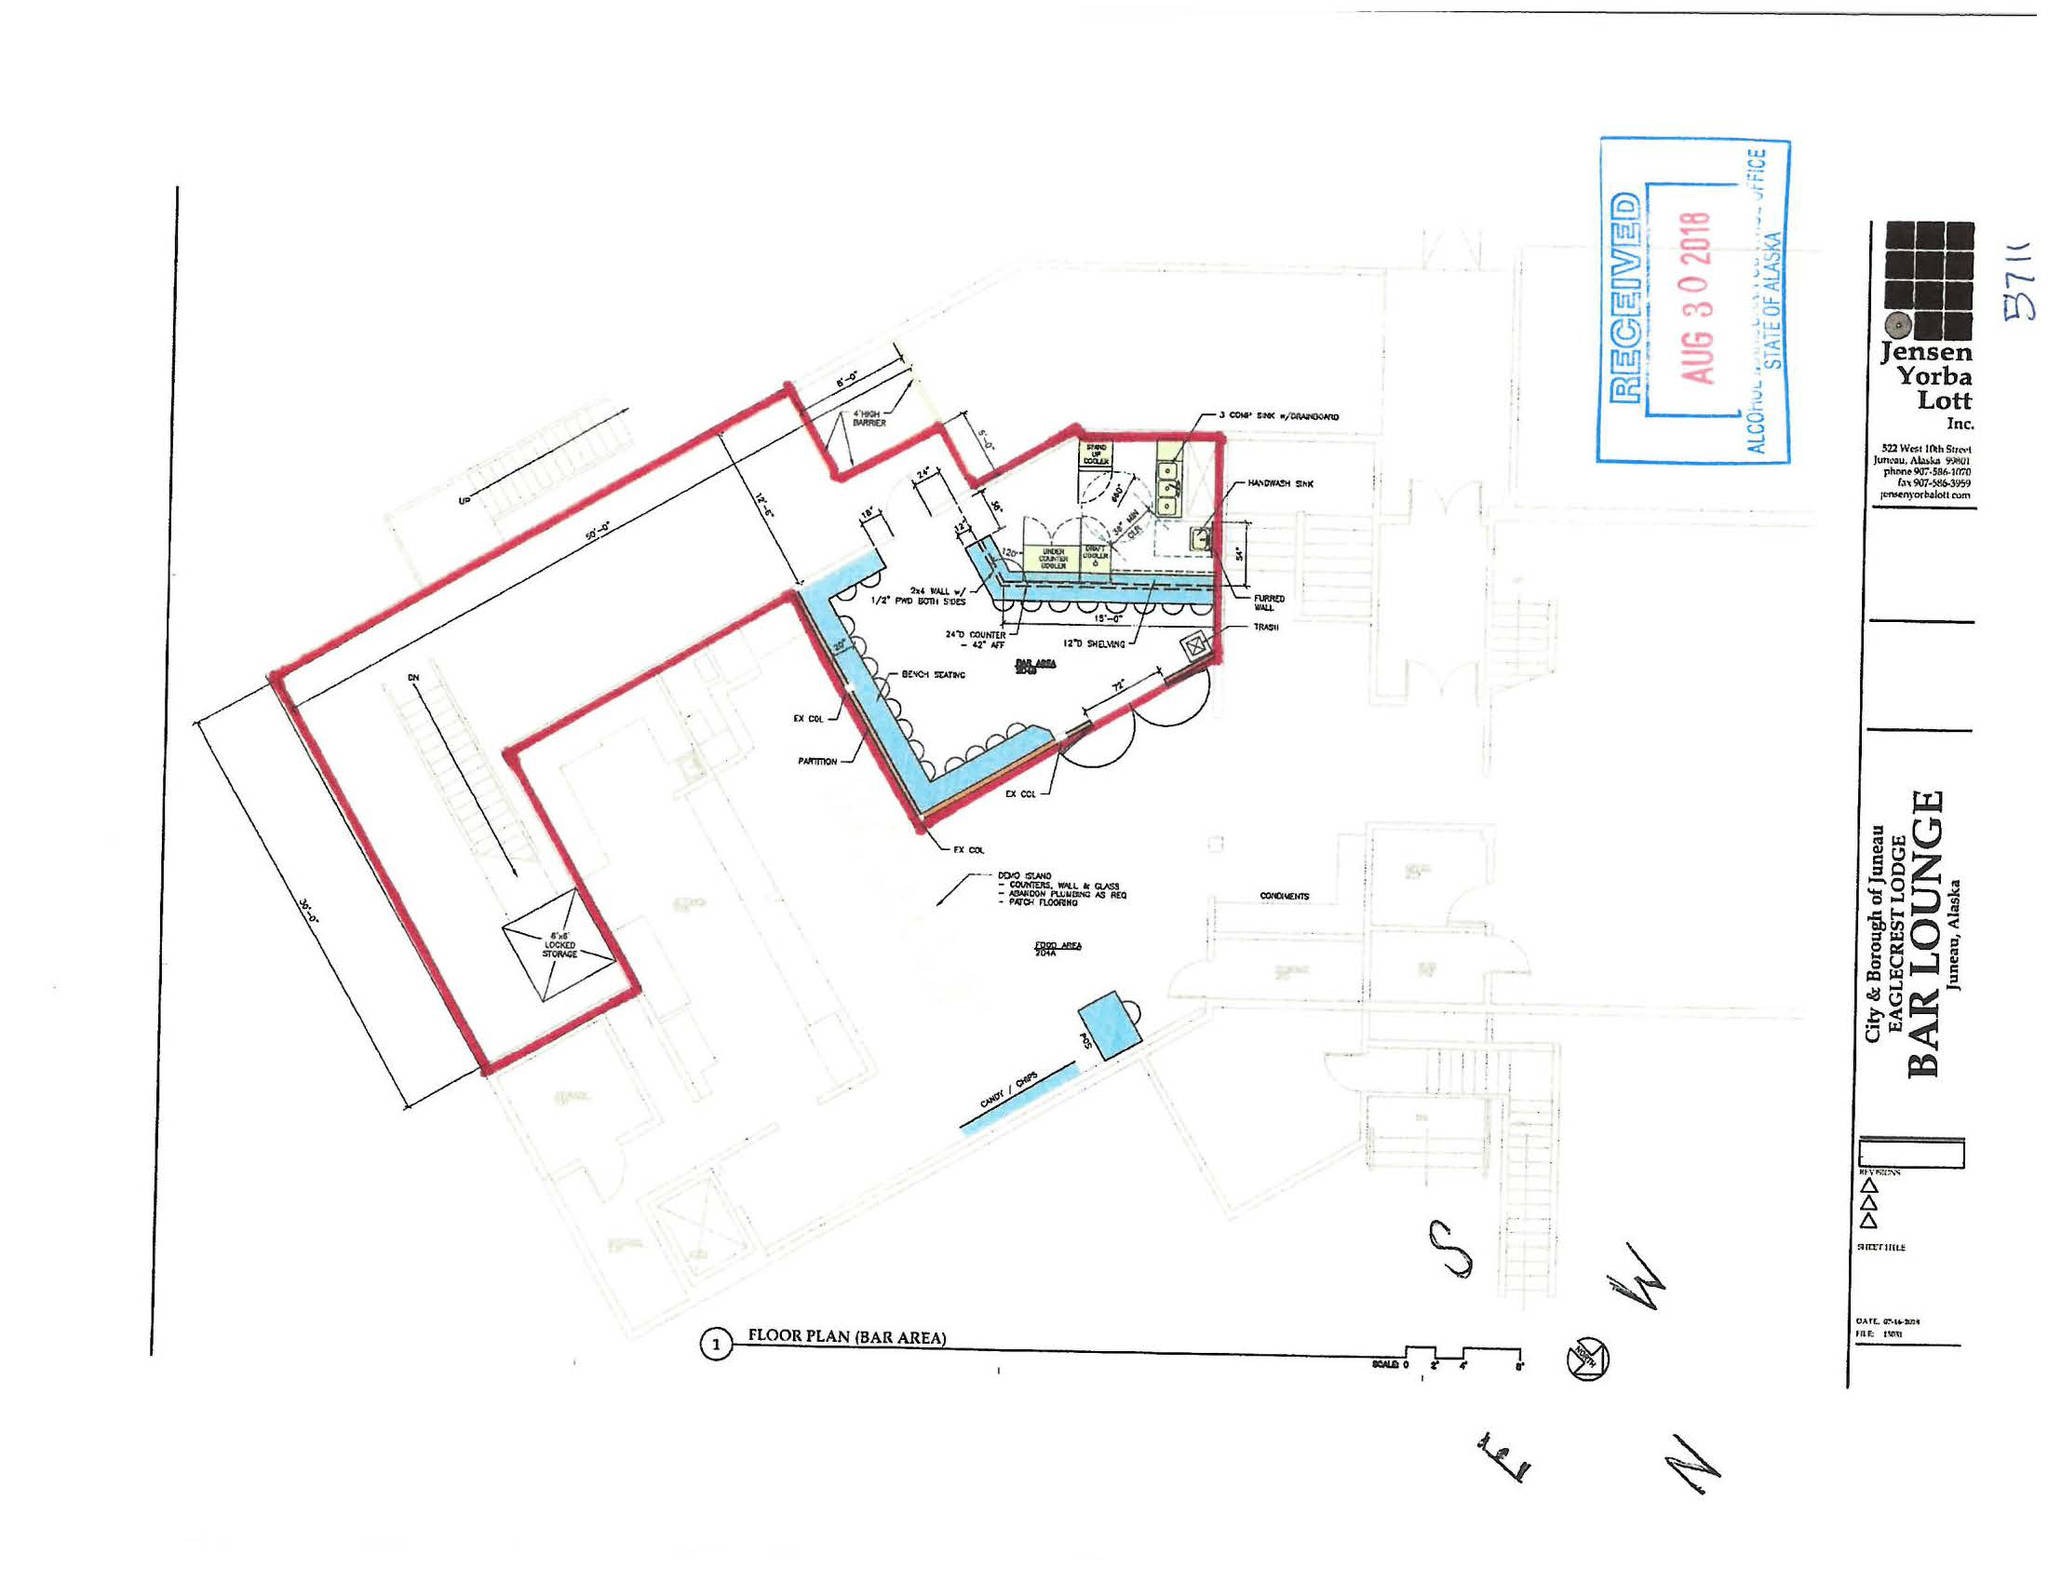 This floor plan shows the layout of the planned Old Tower Bar at Eaglecrest Ski Area. The bar’s alcohol license was rejected by the Alcoholic Beverage Control Board Monday, Oct. 15, 2018. (AMCO document)